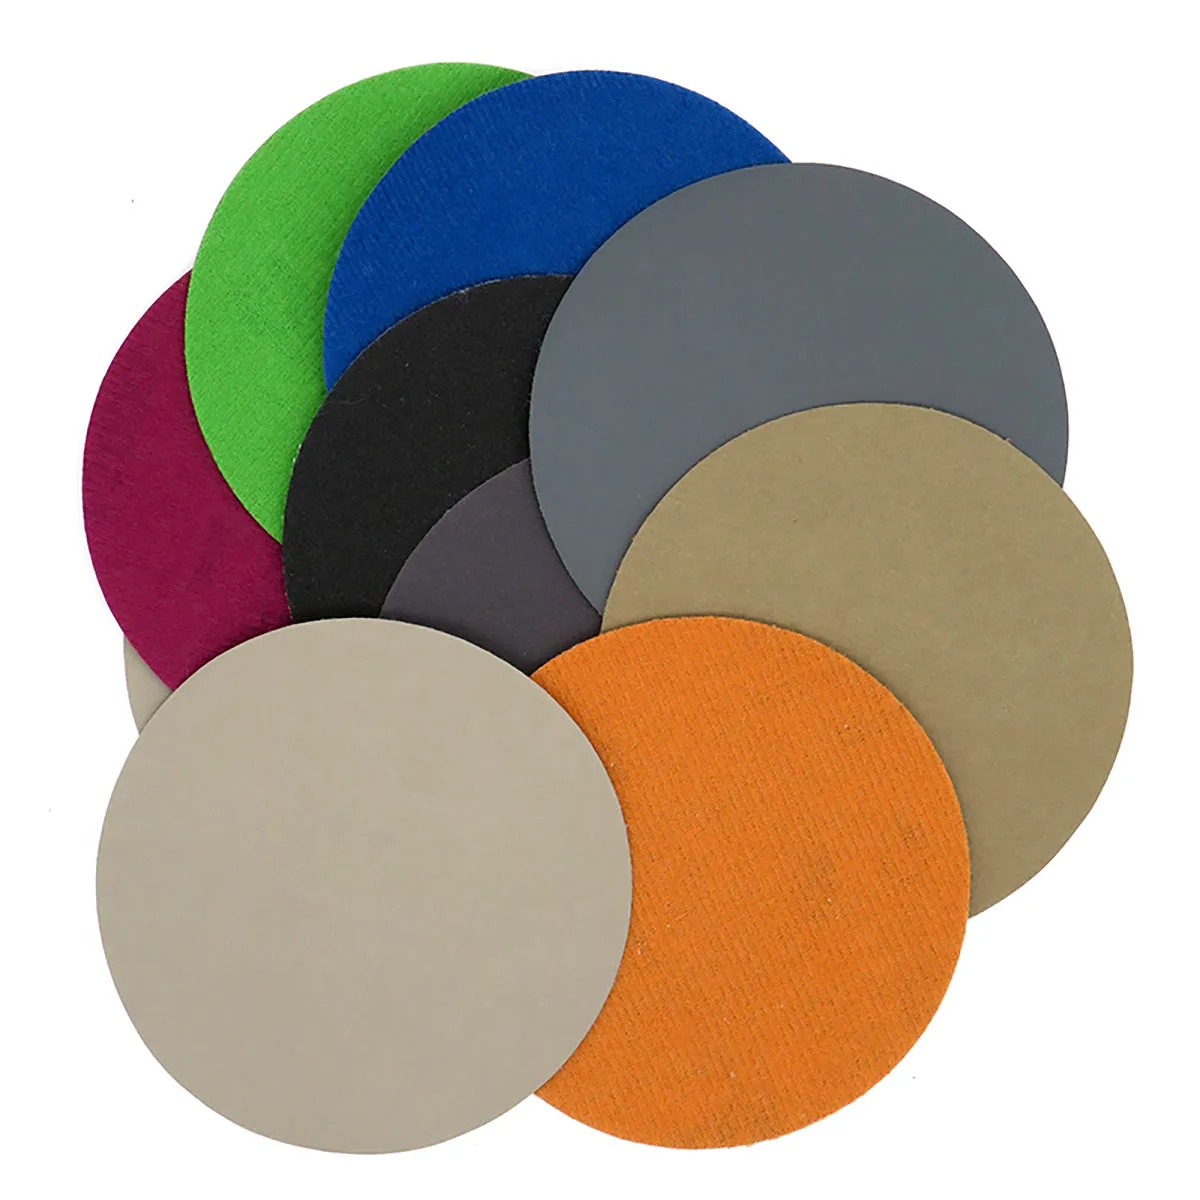 or Dry  Silicon Carbide 60-10000 Grit  Sanding Disc 5'' 125mm Sandpaper Pads 